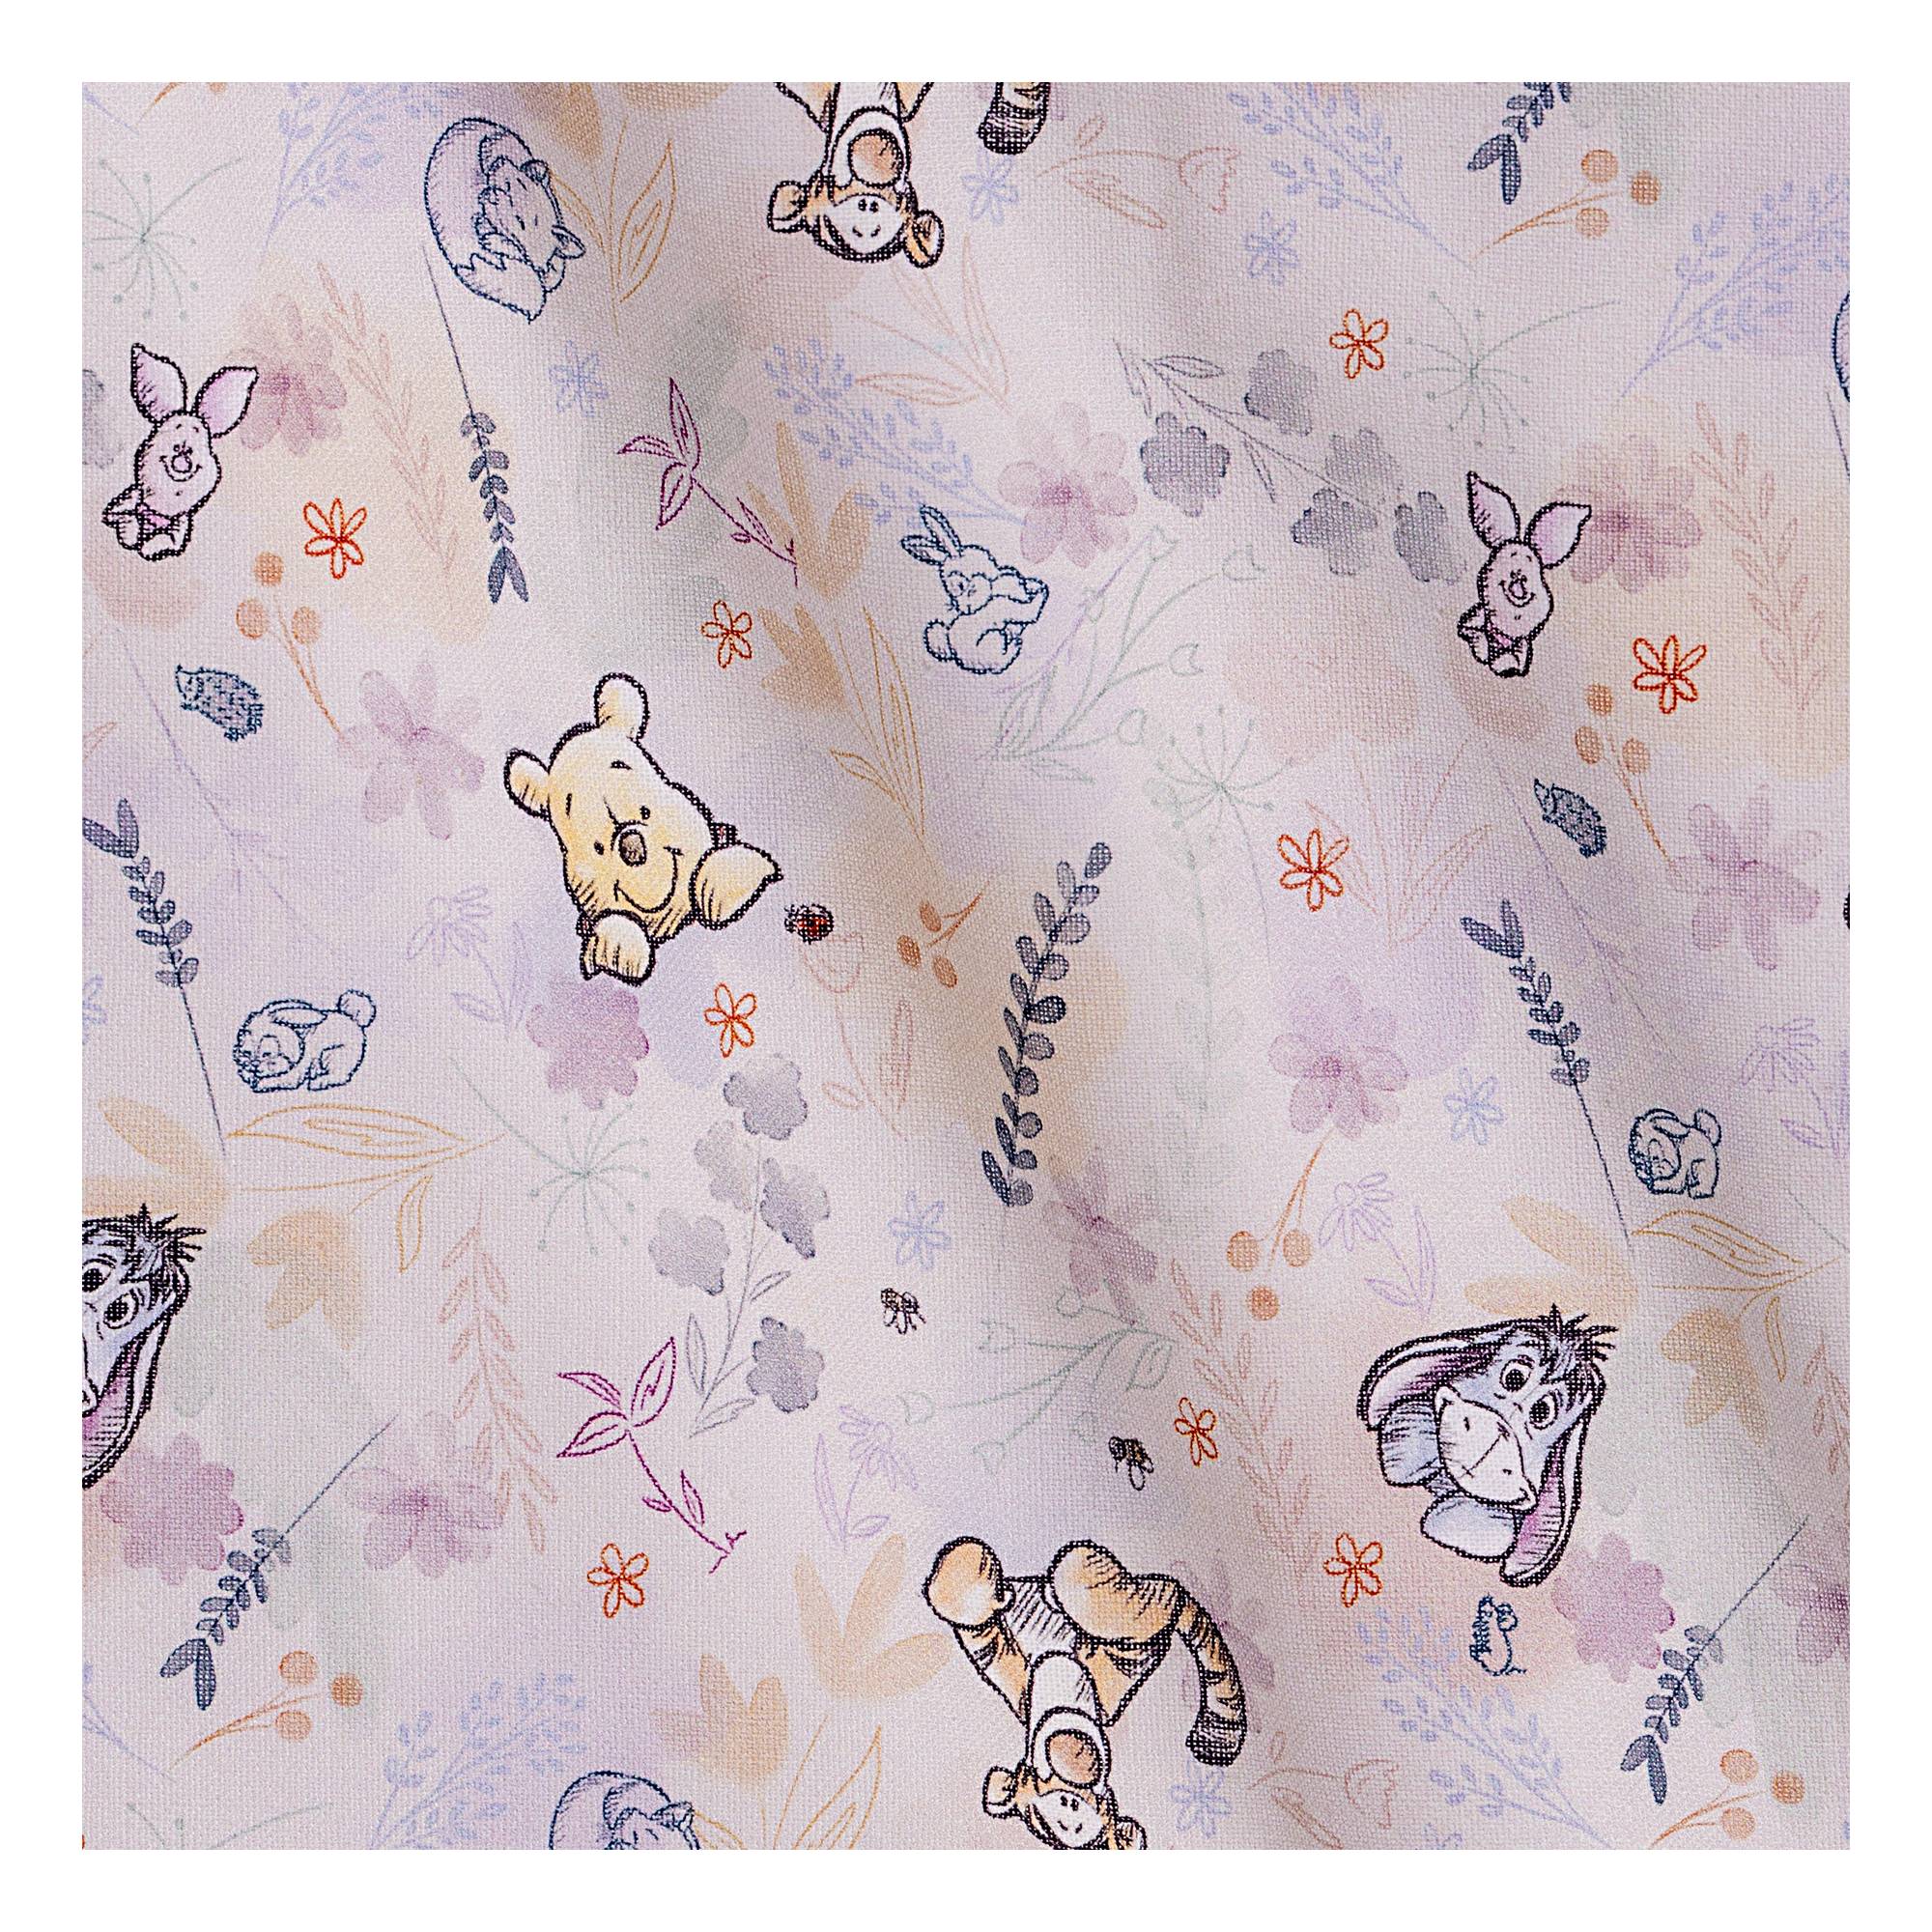 Disney Winnie the Pooh Misty Morning Cotton Fat Quarters 4 Pack